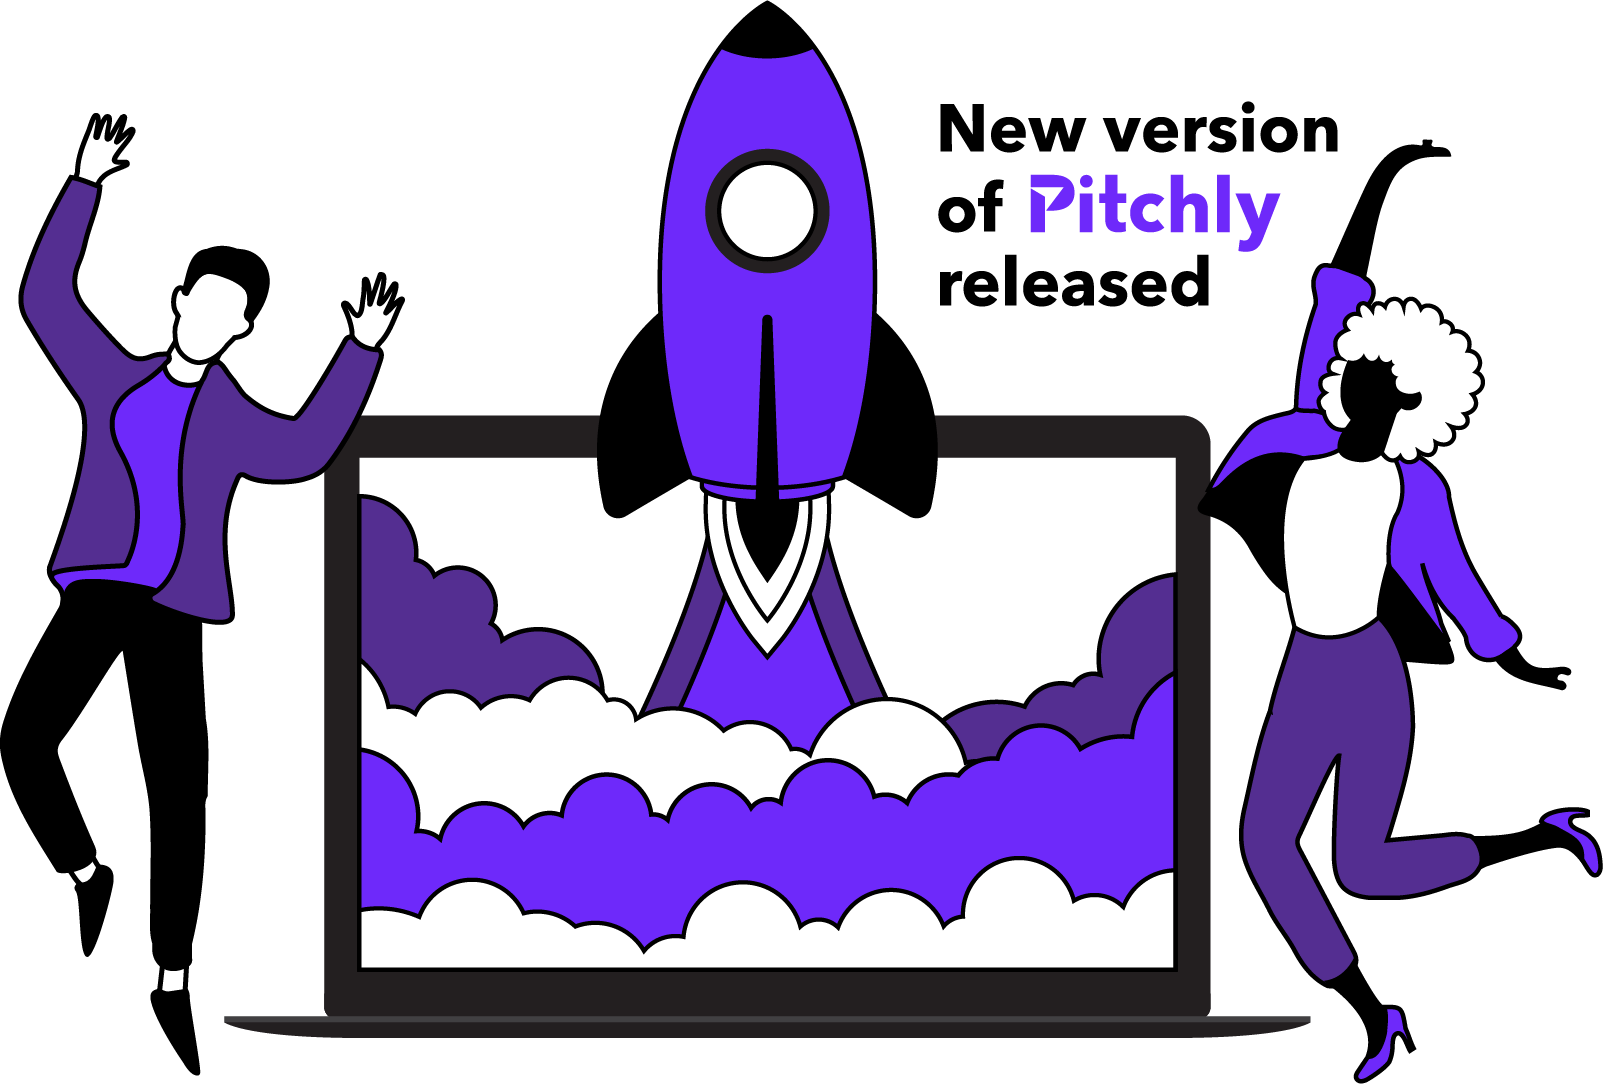 Pitchly announces the release of its latest version of its data enablement platform